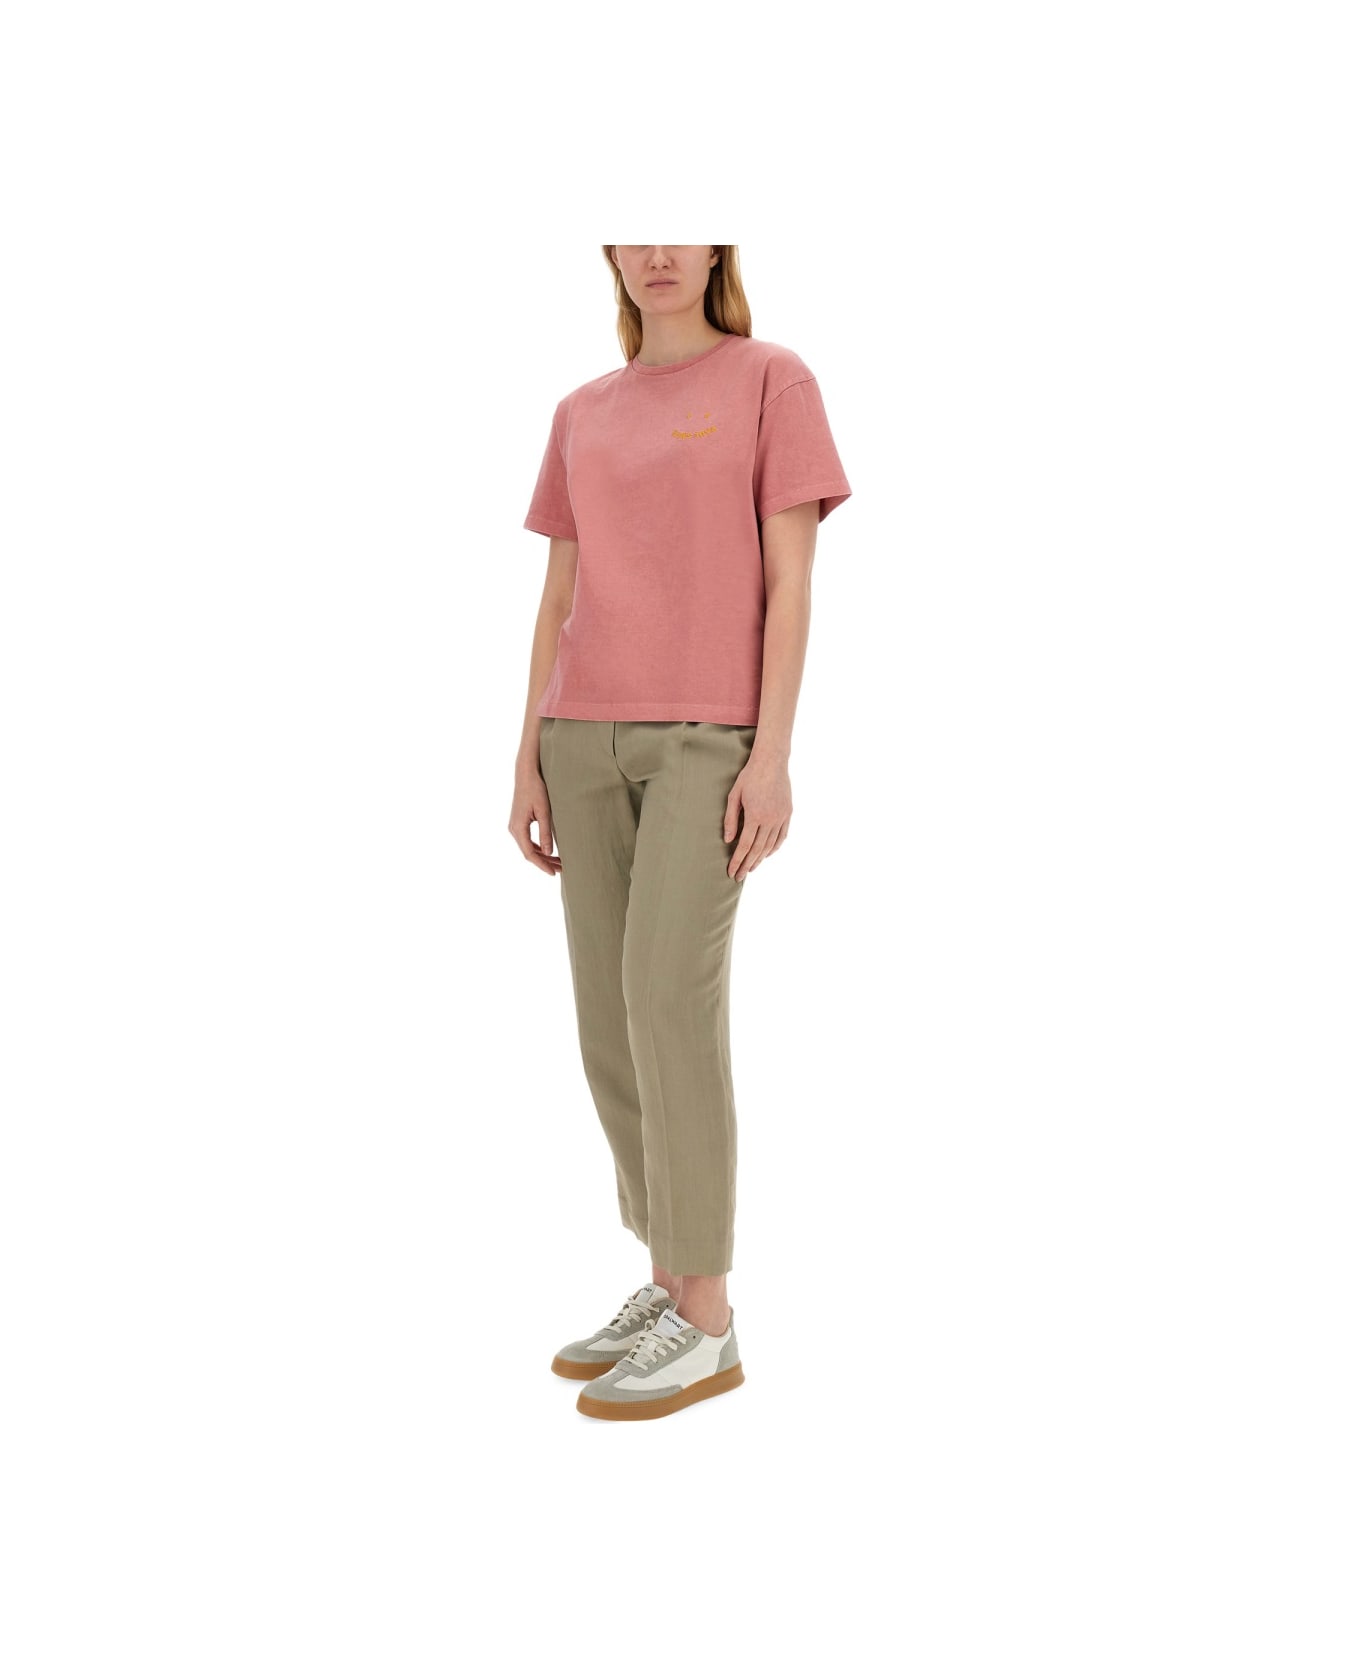 PS by Paul Smith T-shirt With "happy" Print - PINK